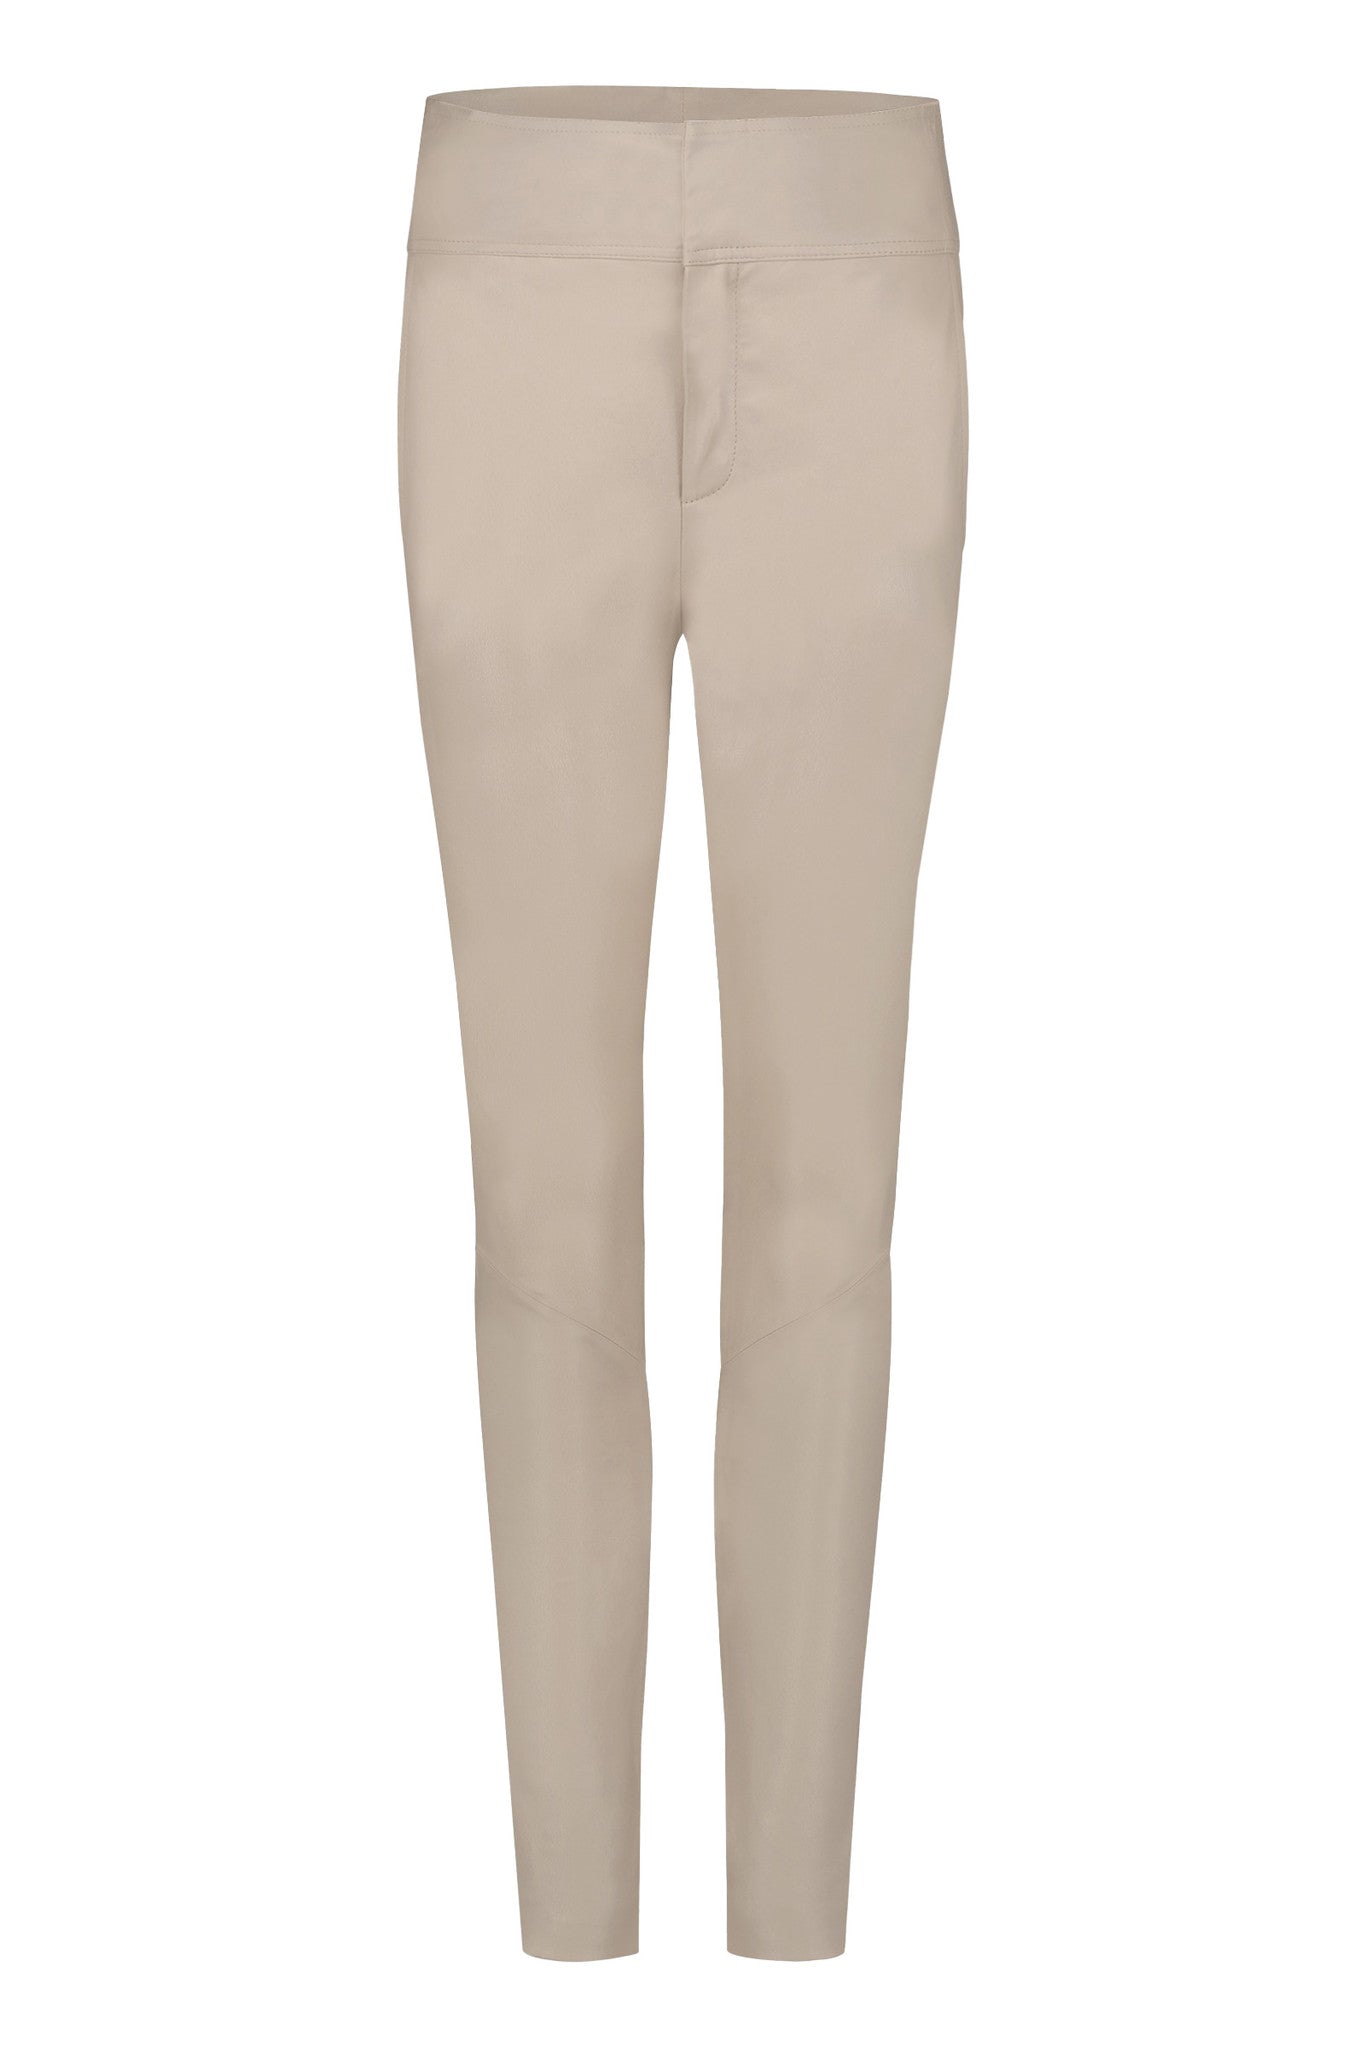 Pananty Leather Pant - Feather White